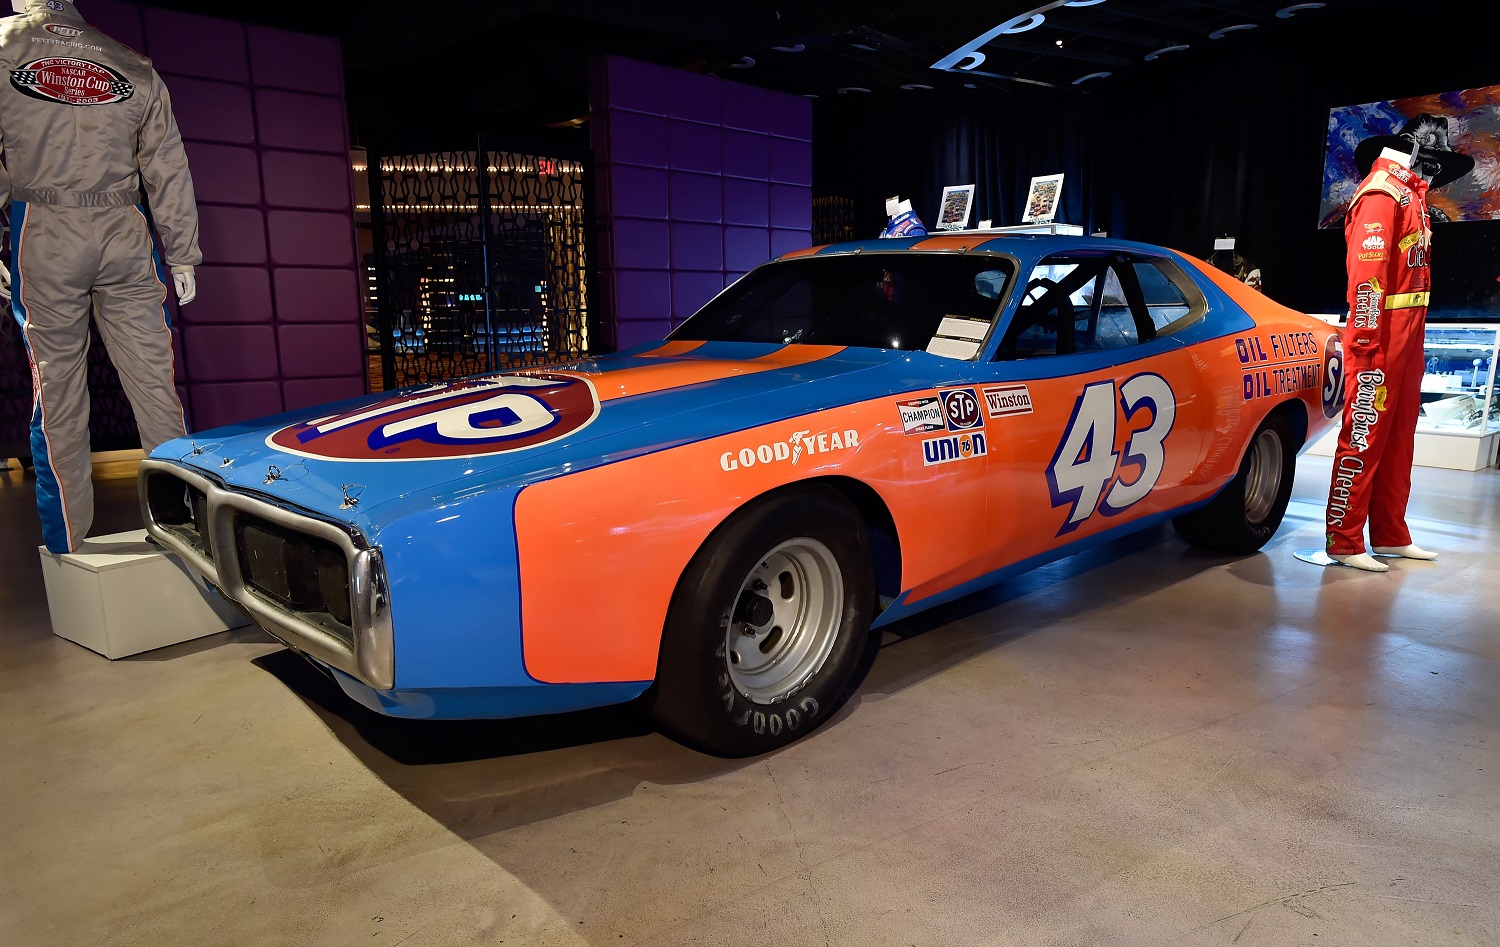 A 1974 Dodge Charger that Richard Petty drove to victory at the 1974 Daytona 500 is displayed at Julien's Auctions' preview of a collection of items from NASCAR Hall of Famer Richard Petty at Planet Hollywood Resort & Casino on May 8, 2018, in Las Vegas, Nevada. | David J. Becker/Getty Images